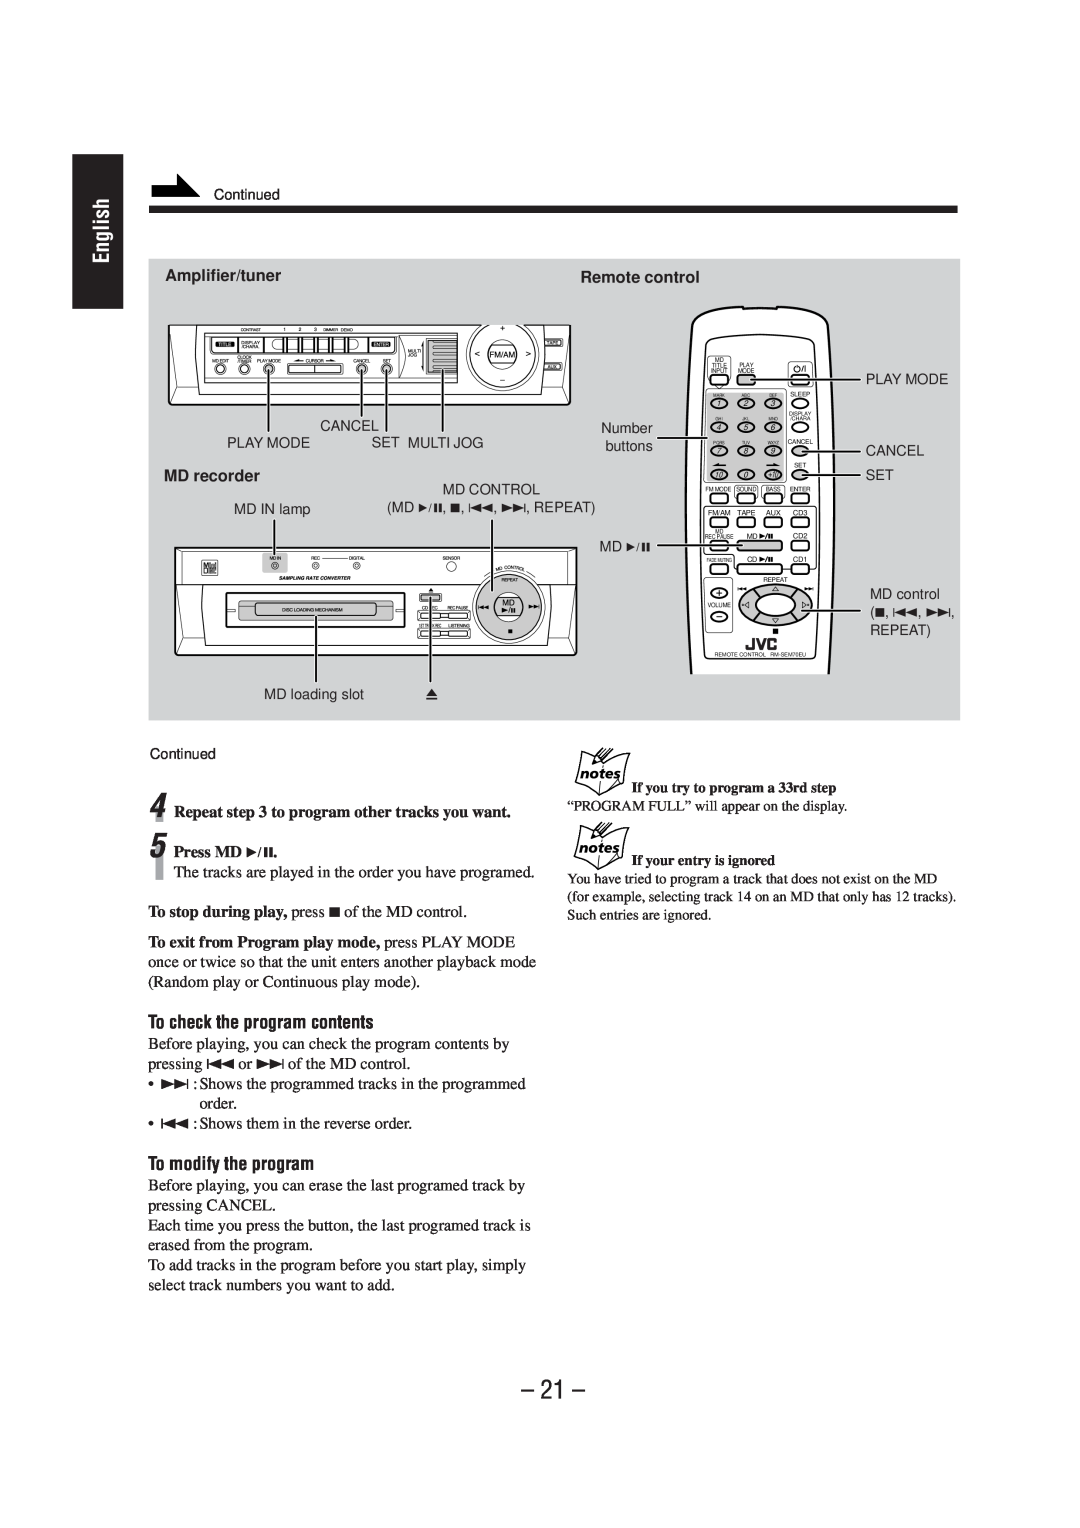 JVC CA-MD70 manual English, To check the program contents, To modify the program, Amplifier/tuner, Remote control 